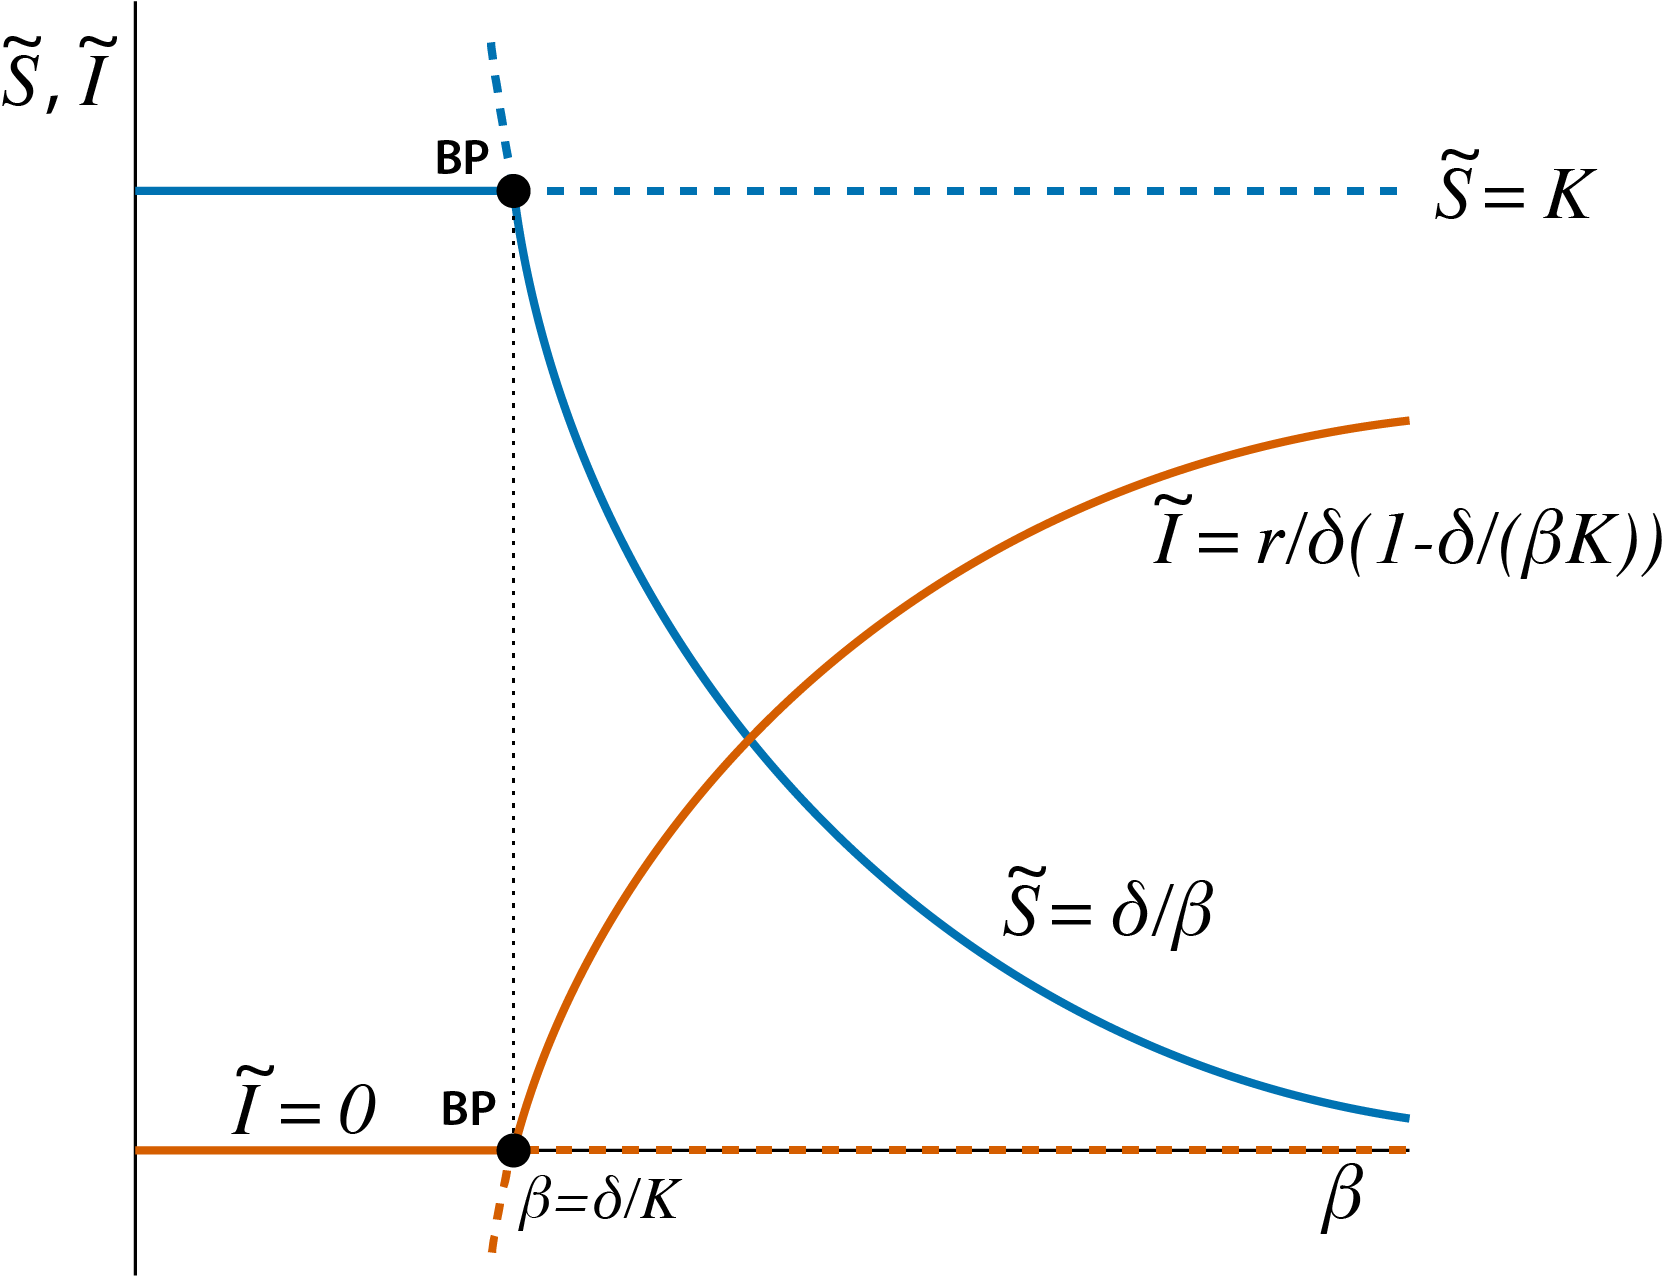 Bifurcation graph of the epidemic model, showing the steady state values $\tilde{S}$ and $\tilde{I}$ as a function of the model parameter $\beta$. Curve sections representing unstable steady states (saddle points) are indicated with dashed lines, curve sections representing stable steady states are indicated with solid lines. The special point indicated with 'BP', occurring at $\beta=\delta/K$ is the branching point or transcritical bifurcation point.